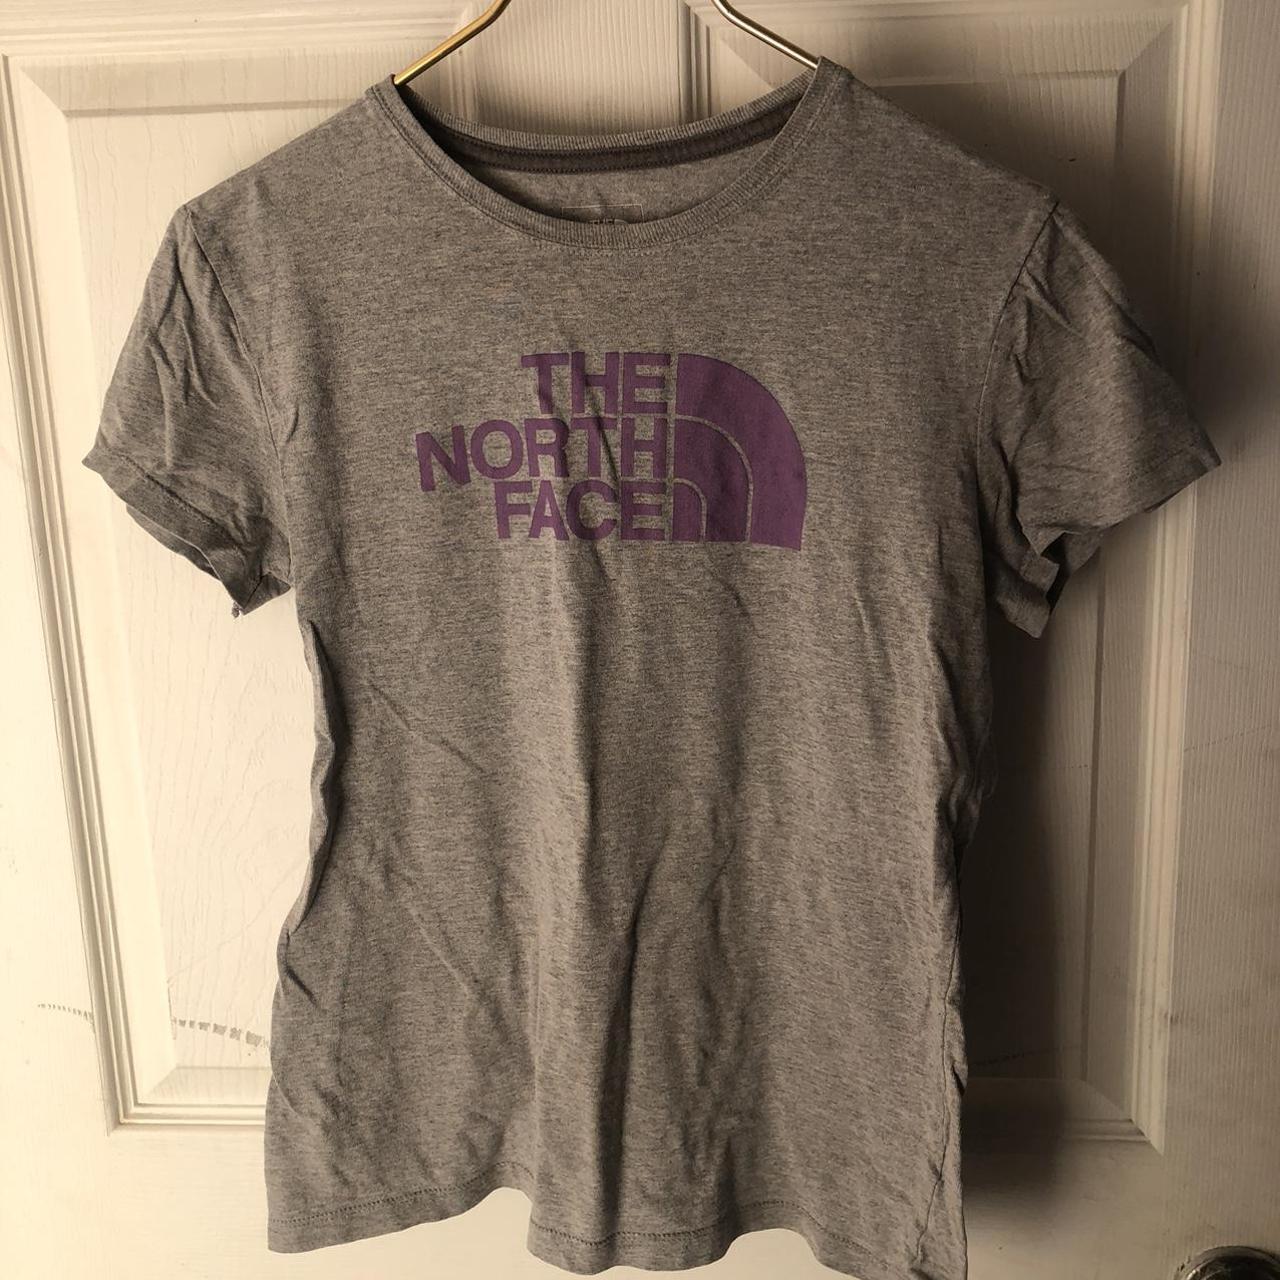 The North Face Purple Label Women's Grey and Purple T-shirt